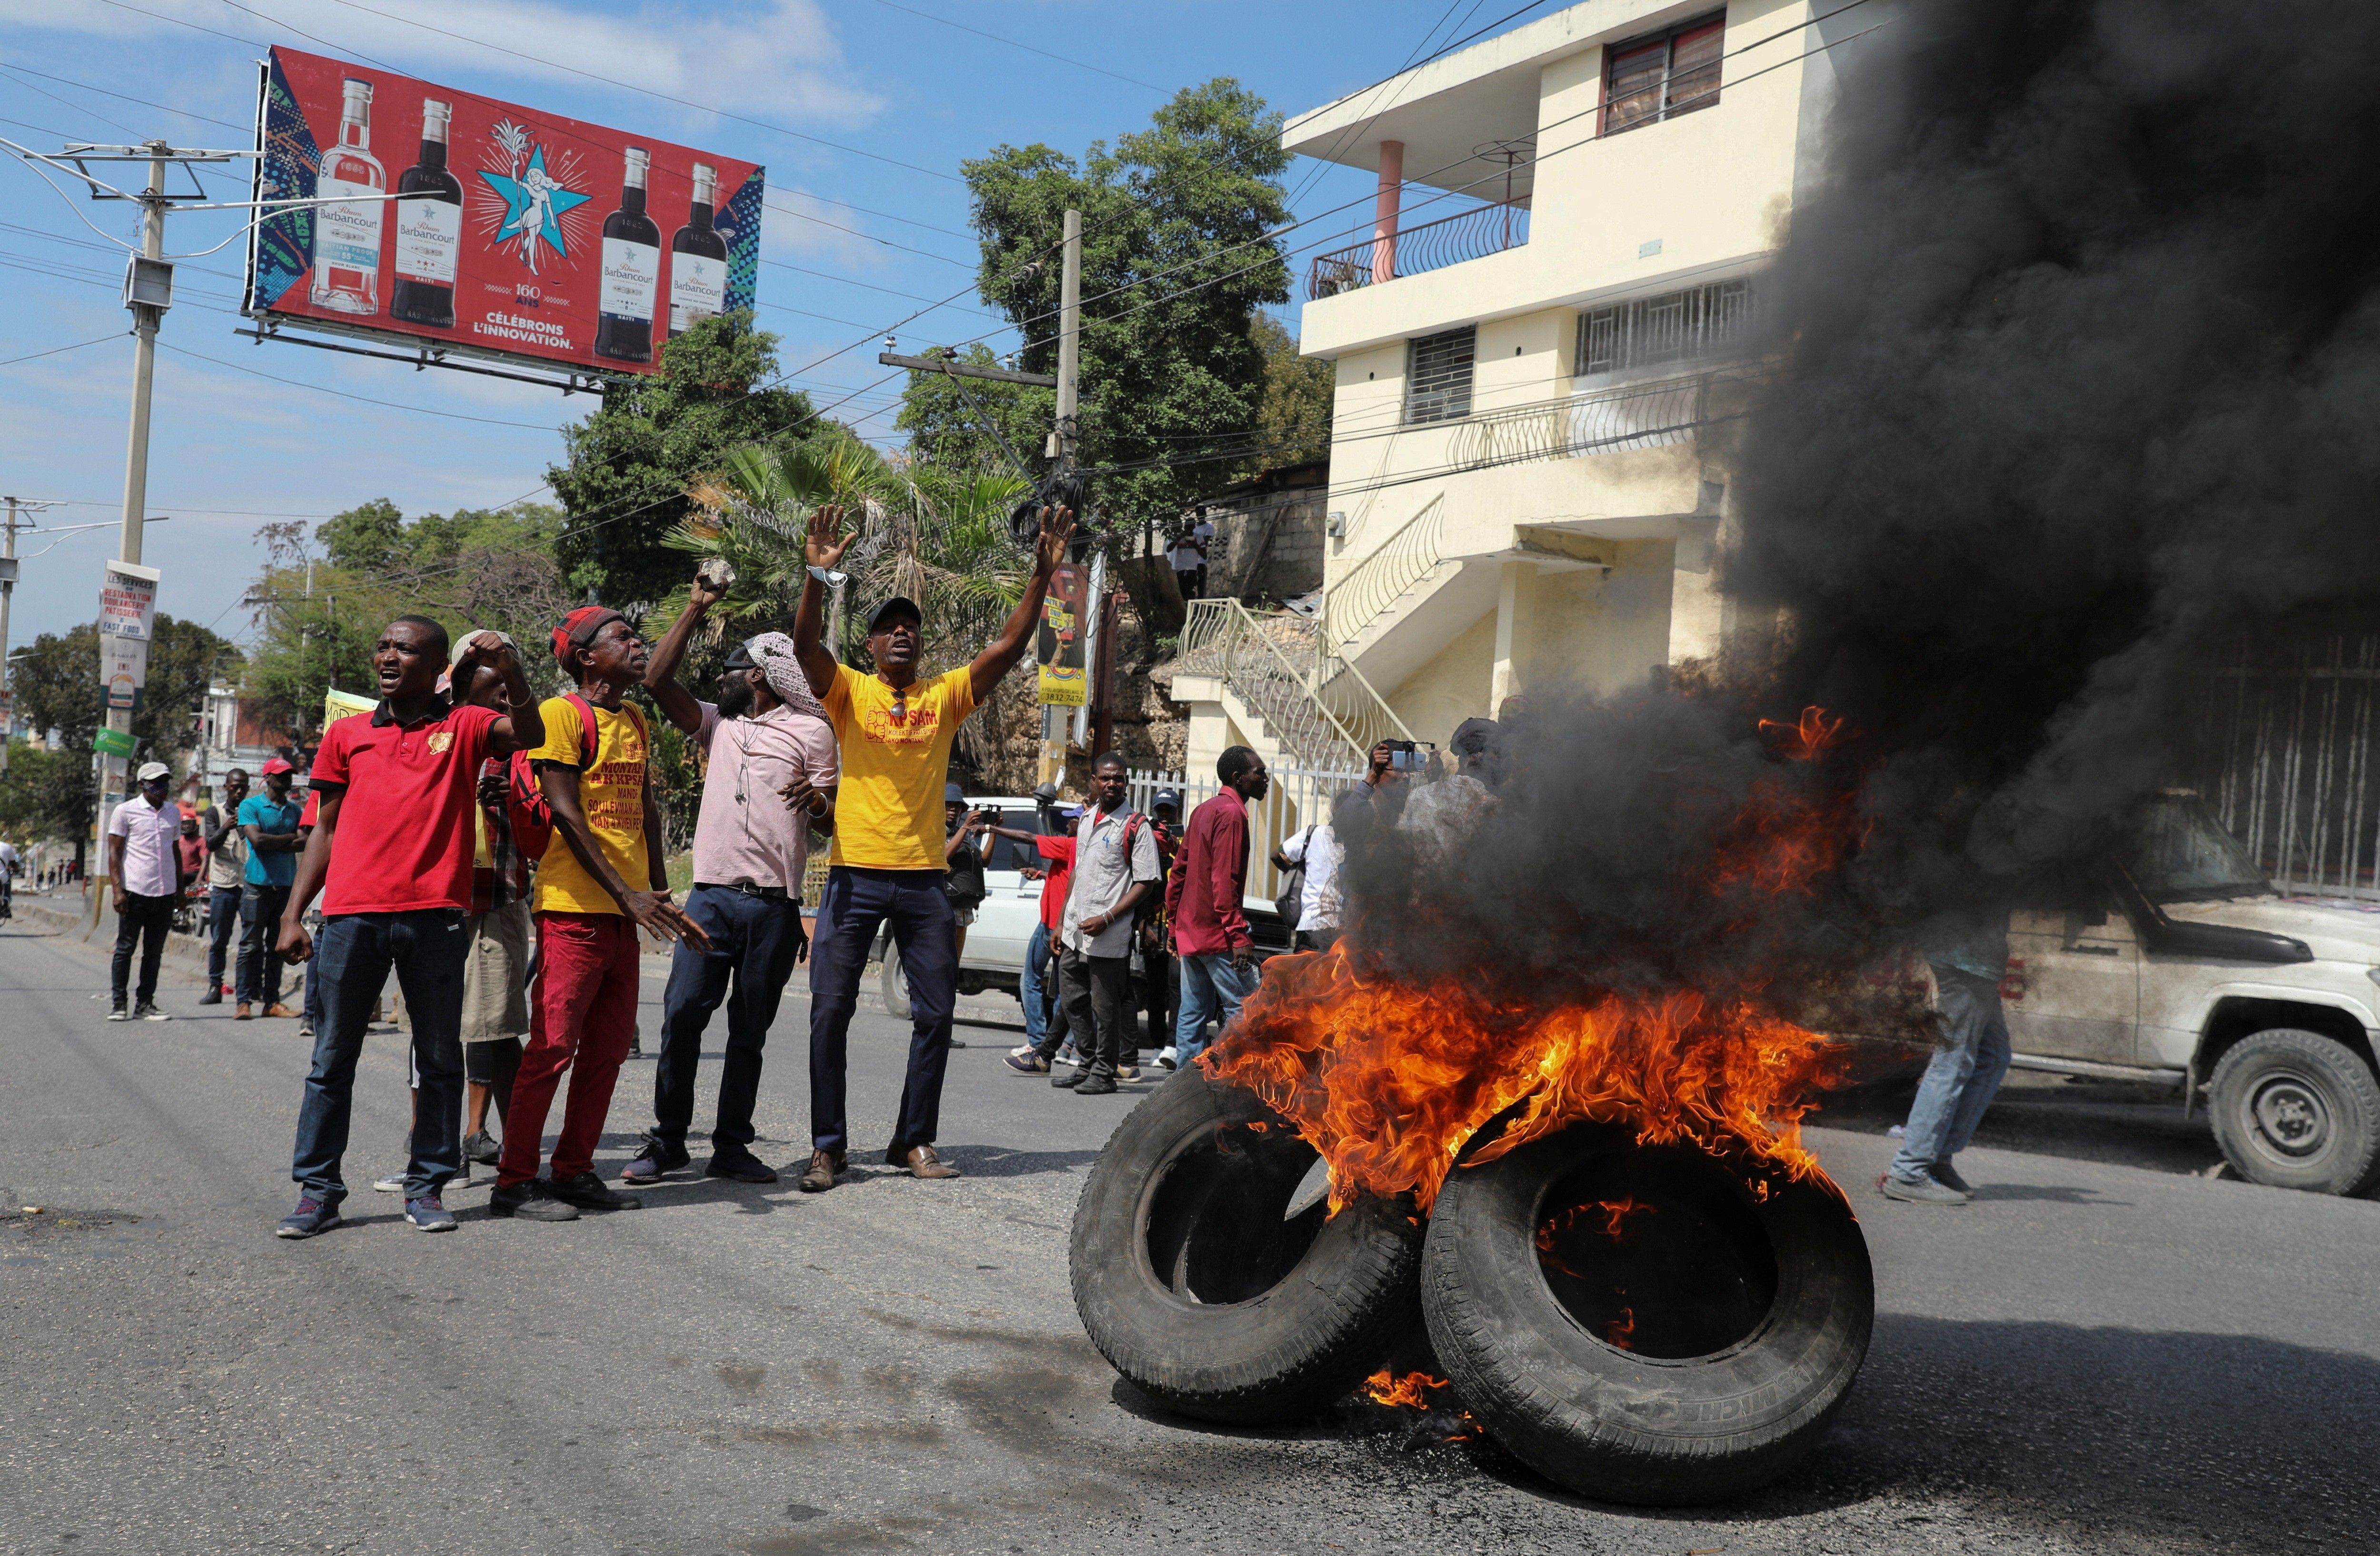 From coup to chaos: 20 years after the US ousted Haiti’s president